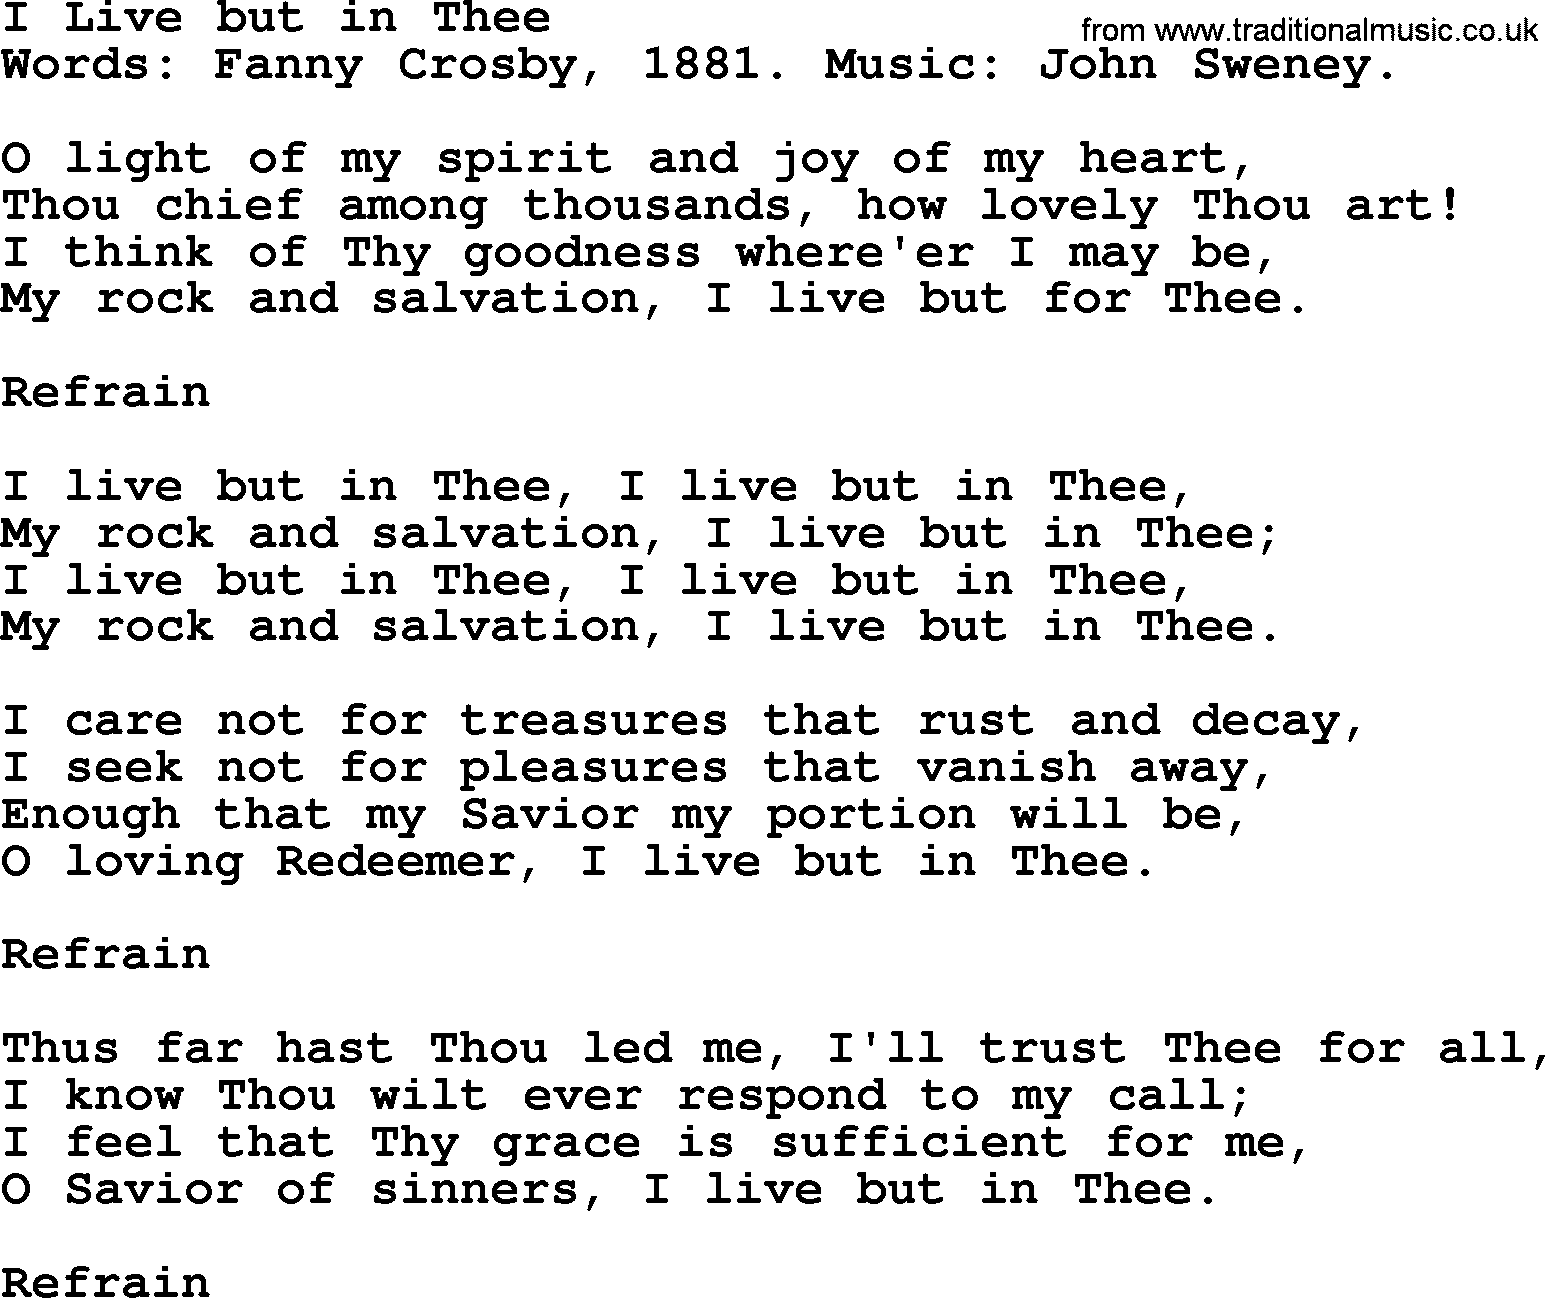 Fanny Crosby song: I Live But In Thee, lyrics